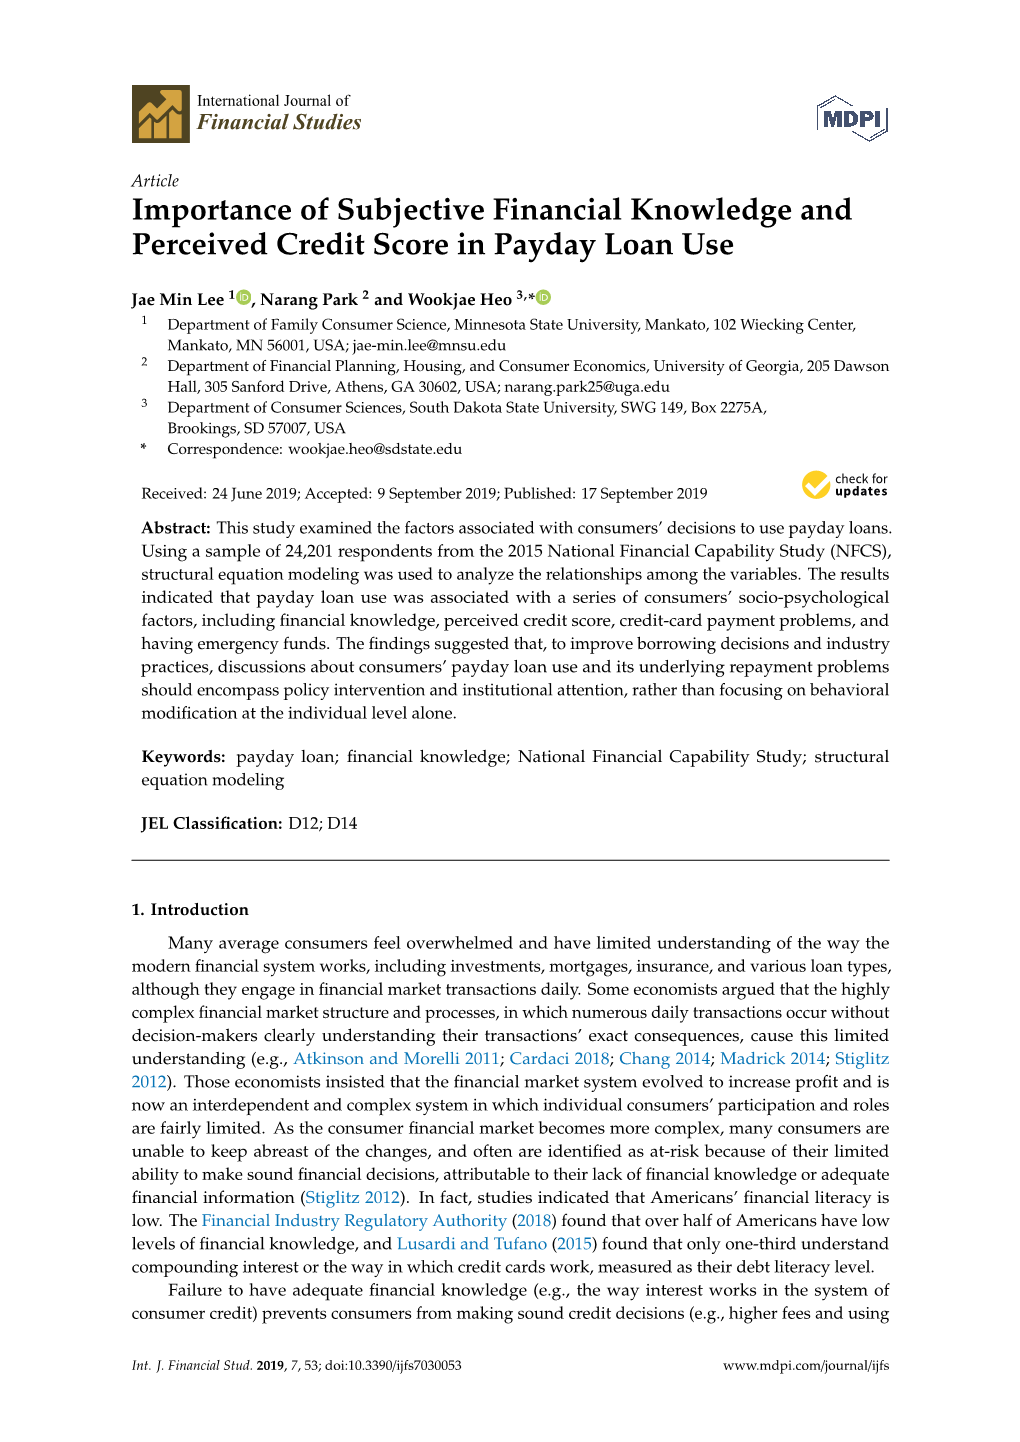 Importance of Subjective Financial Knowledge and Perceived Credit Score in Payday Loan Use